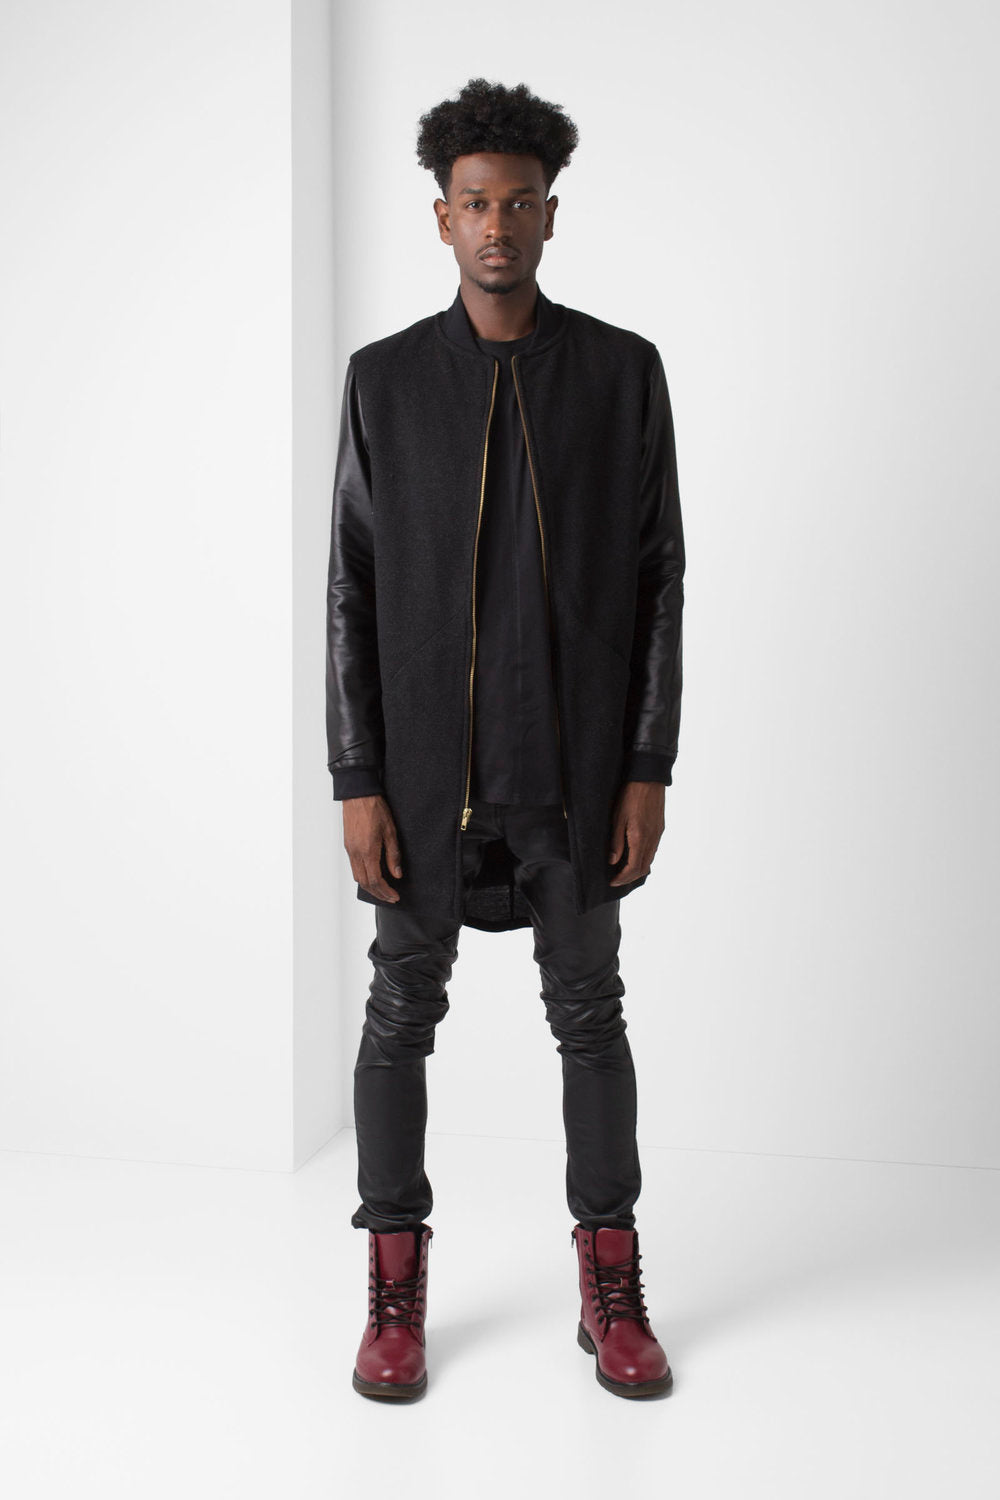 Black Wool long-line Jacket with Faux Leather Sleeves - pacorogiene